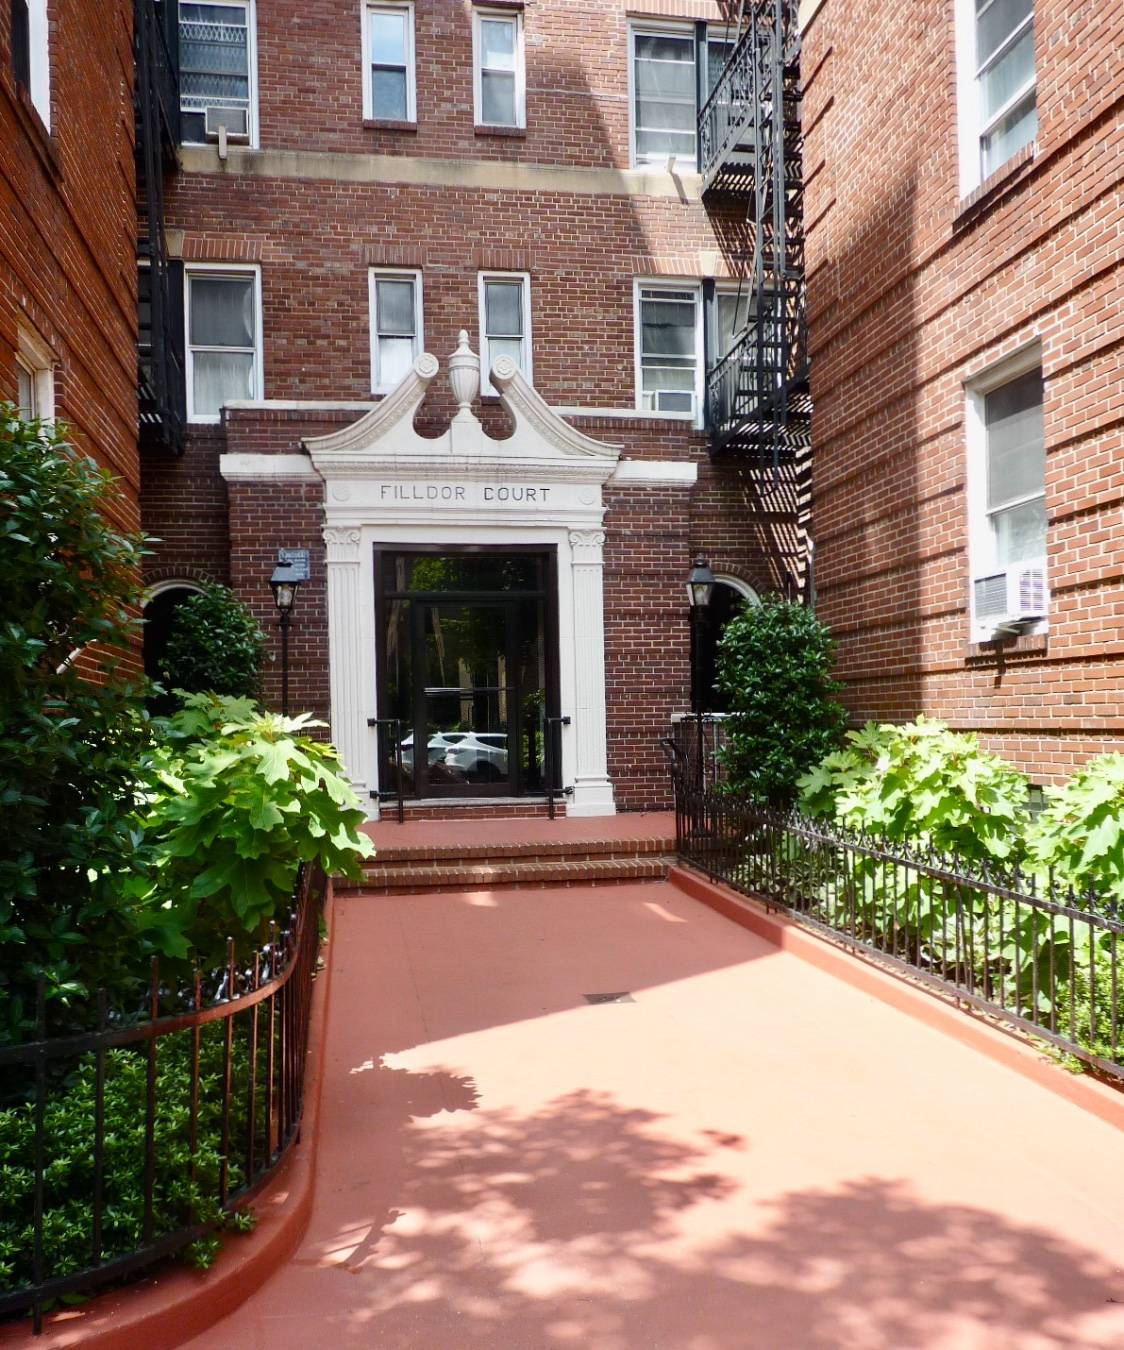 Spacious amp ; bright 1 Bedroom 1 Bath unit located on a quiet, tree lined street at Filldor Court.